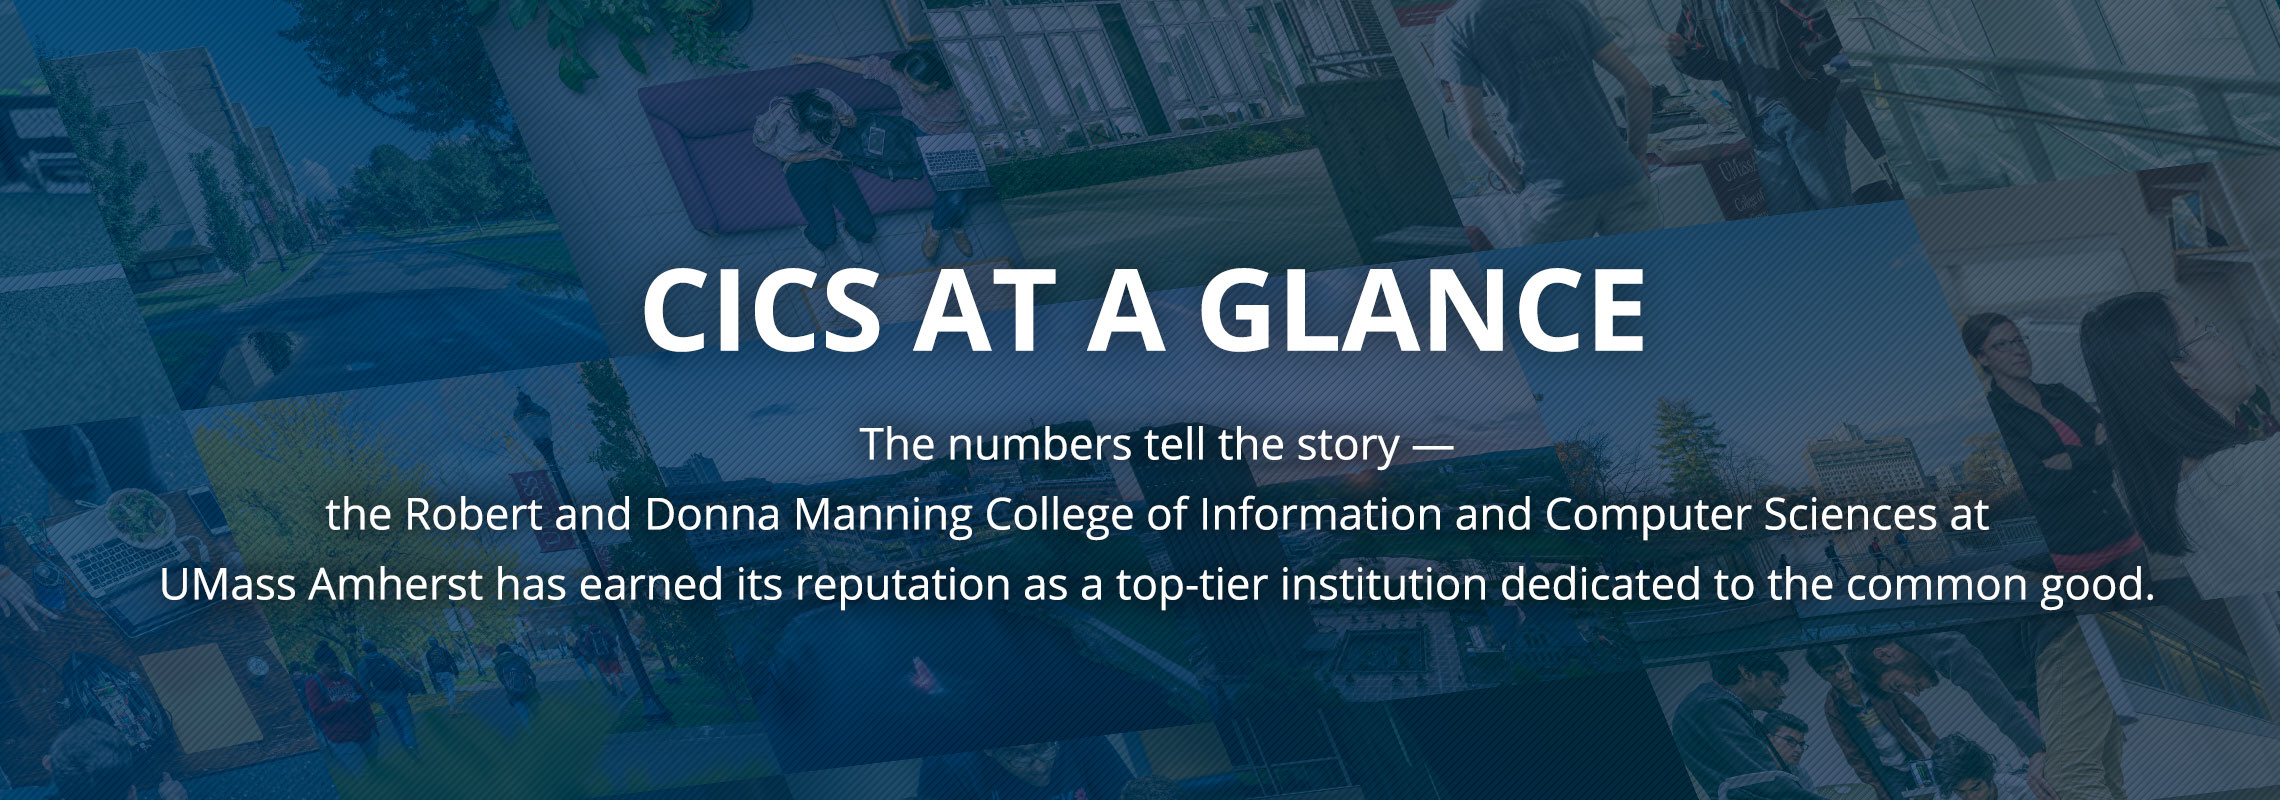 The numbers tell the story — the Robert and Donna Manning College of Information and Computer Sciences at UMass Amherst has earned its reputation as a top-tier institution dedicated to the common good.